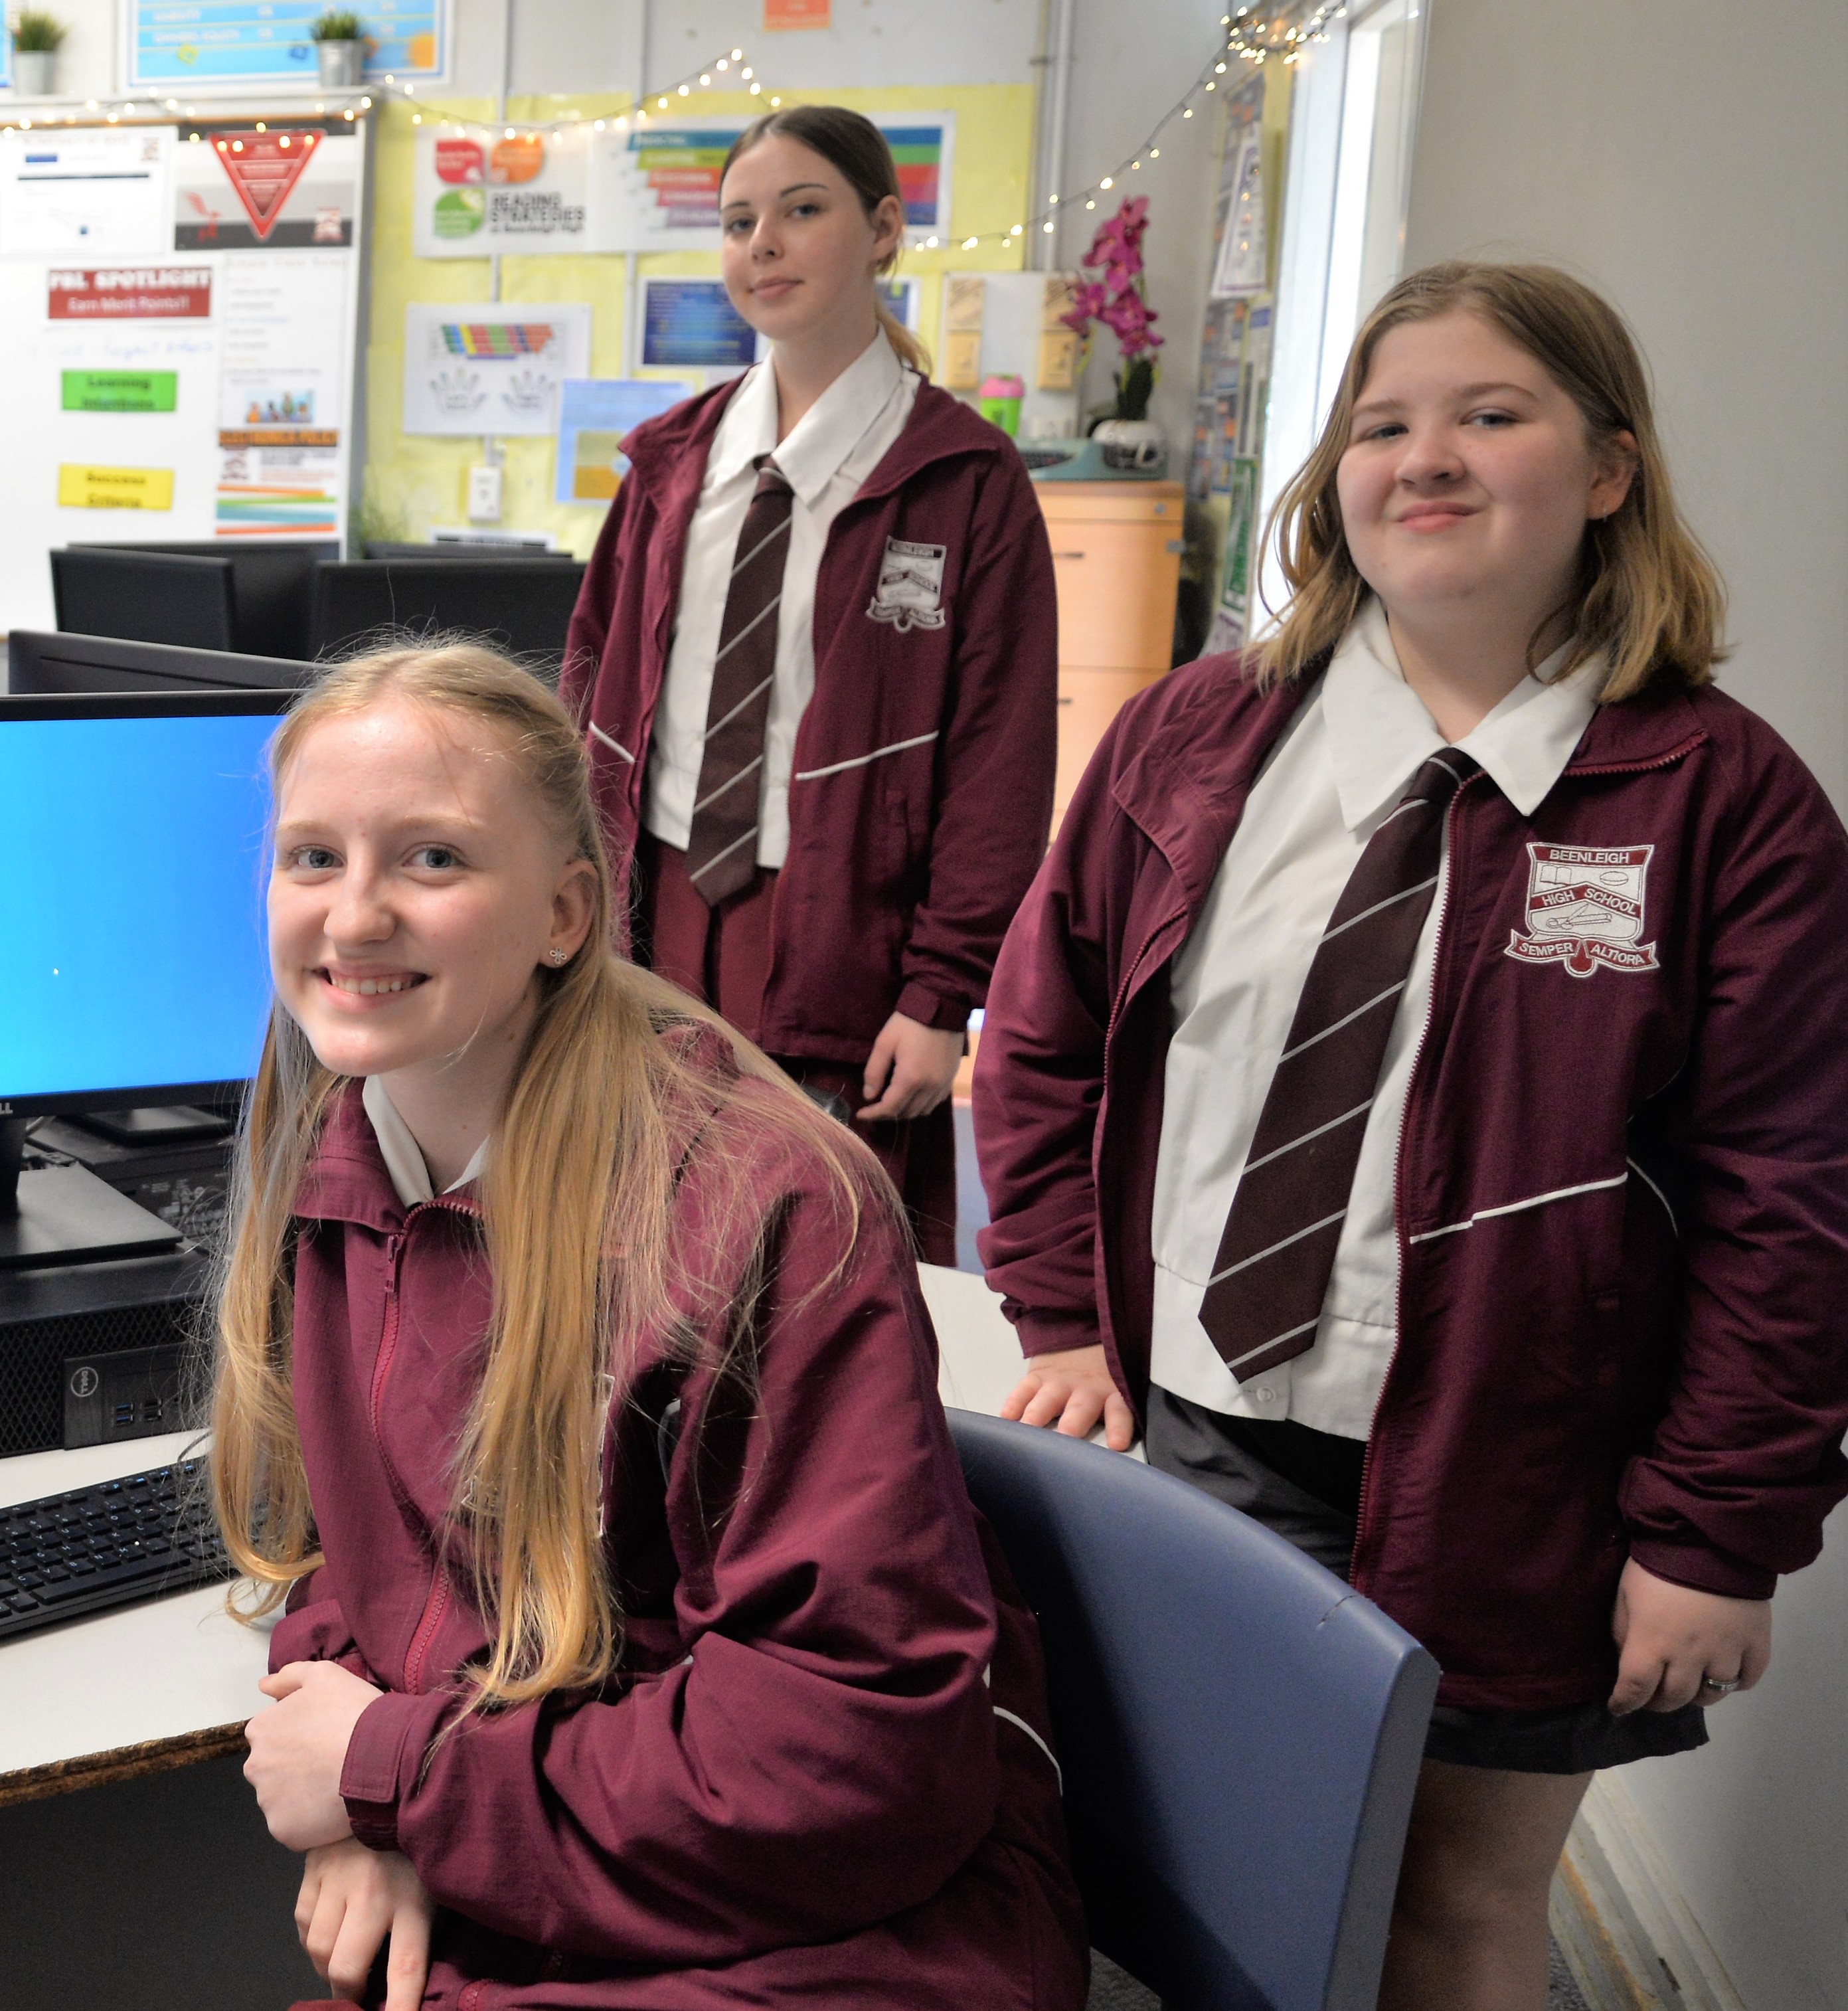 L-r Beenleigh State High School Students Mia Chapman, Violet Hudson and Isabelle Robinson.